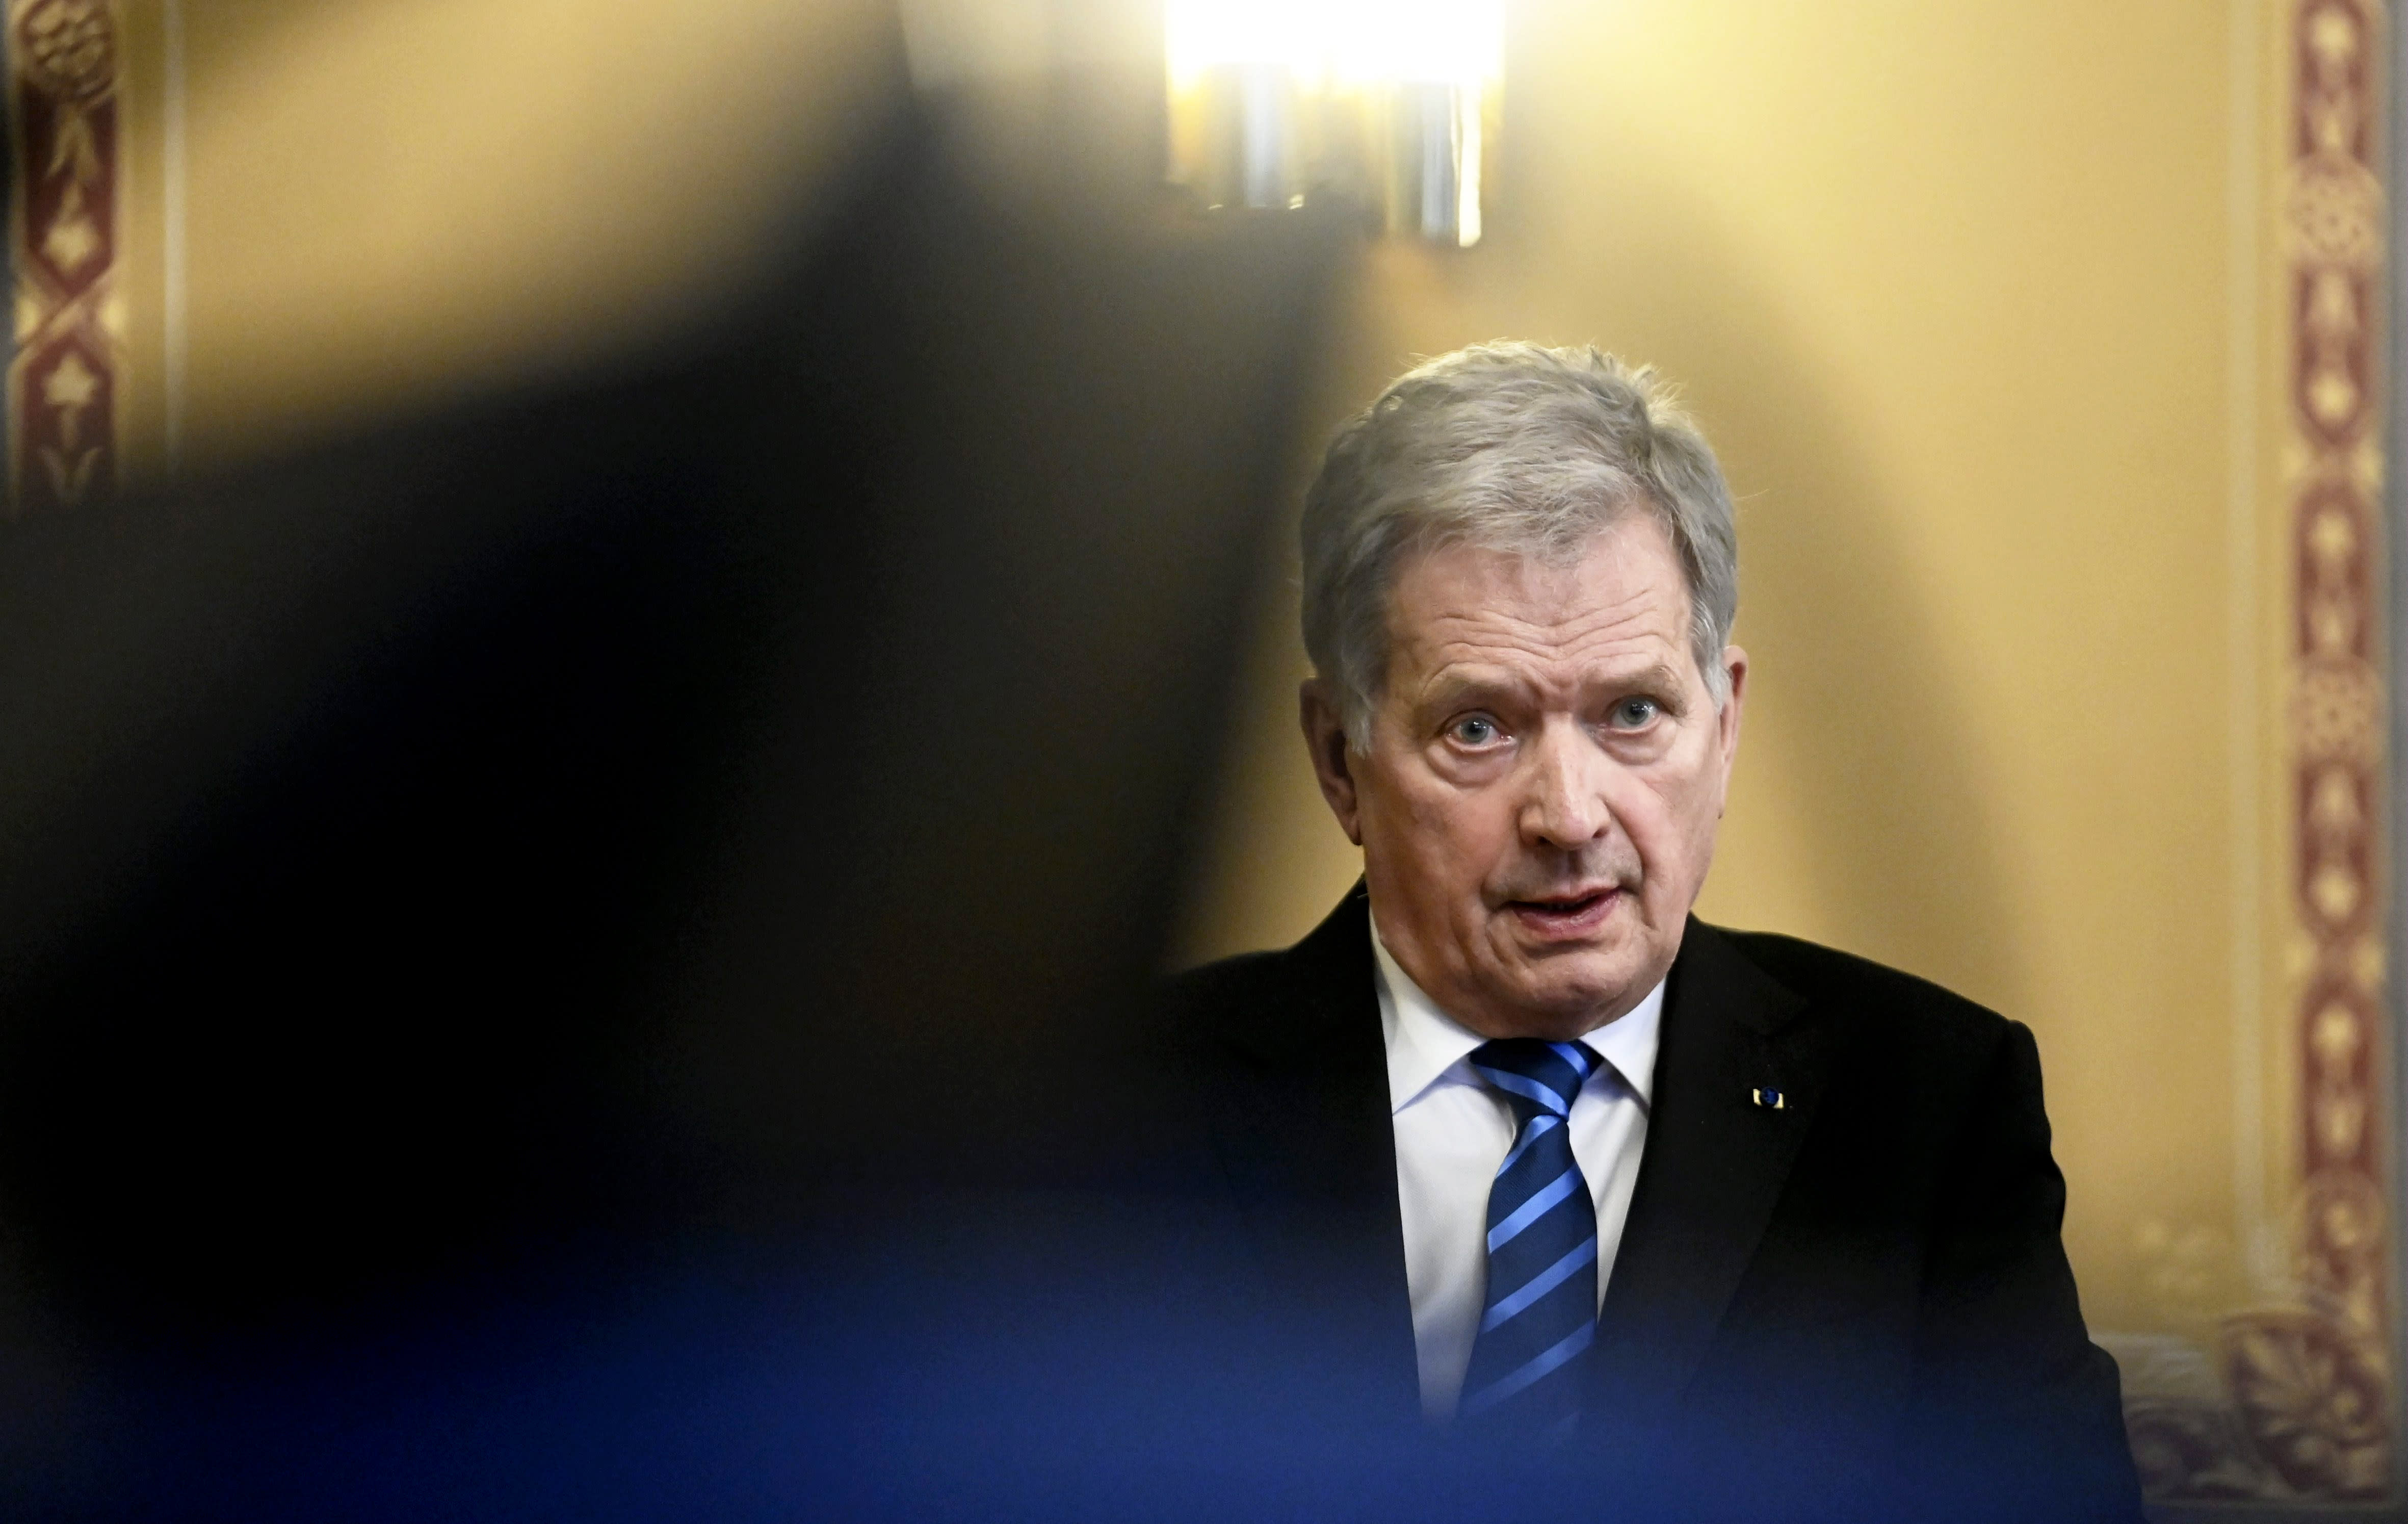 Niinistö for MTV: A personal NATO attitude "quite clear" but it is not yet time to reveal it